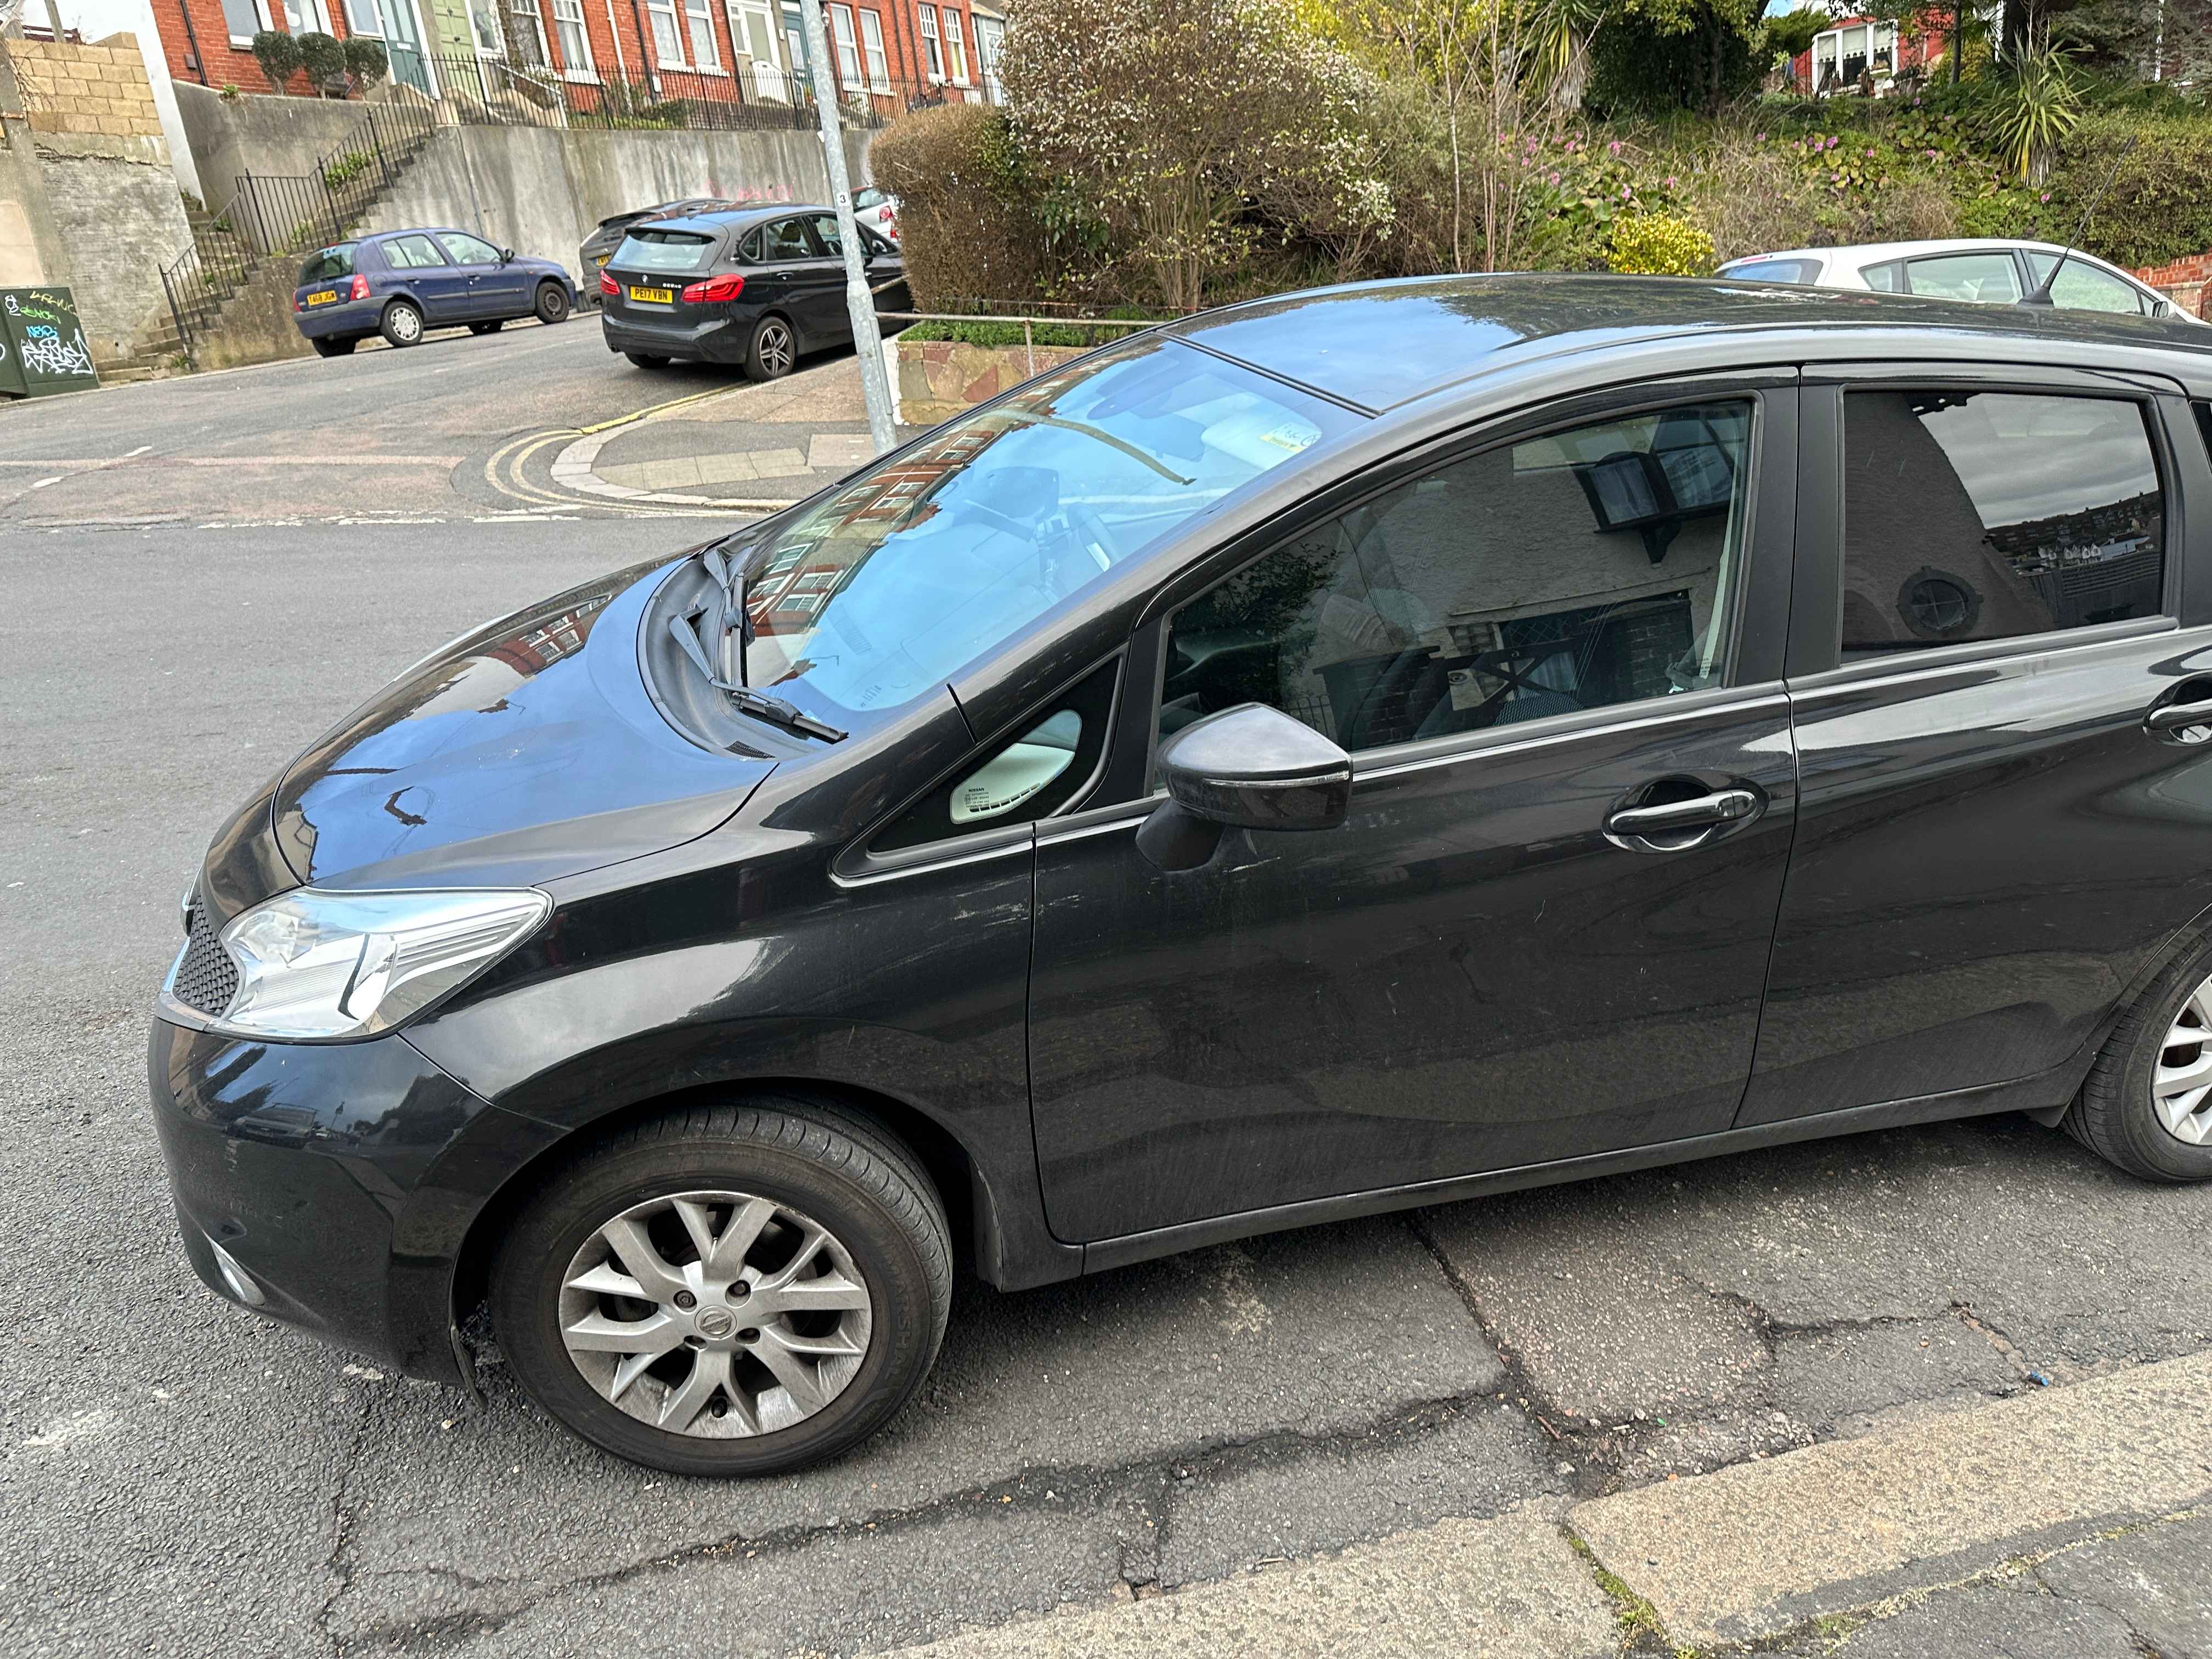 Photograph of BW15 VNJ - a Black Nissan Note parked in Hollingdean by a non-resident who uses the local area as part of their Brighton commute. The eighth of fifteen photographs supplied by the residents of Hollingdean.